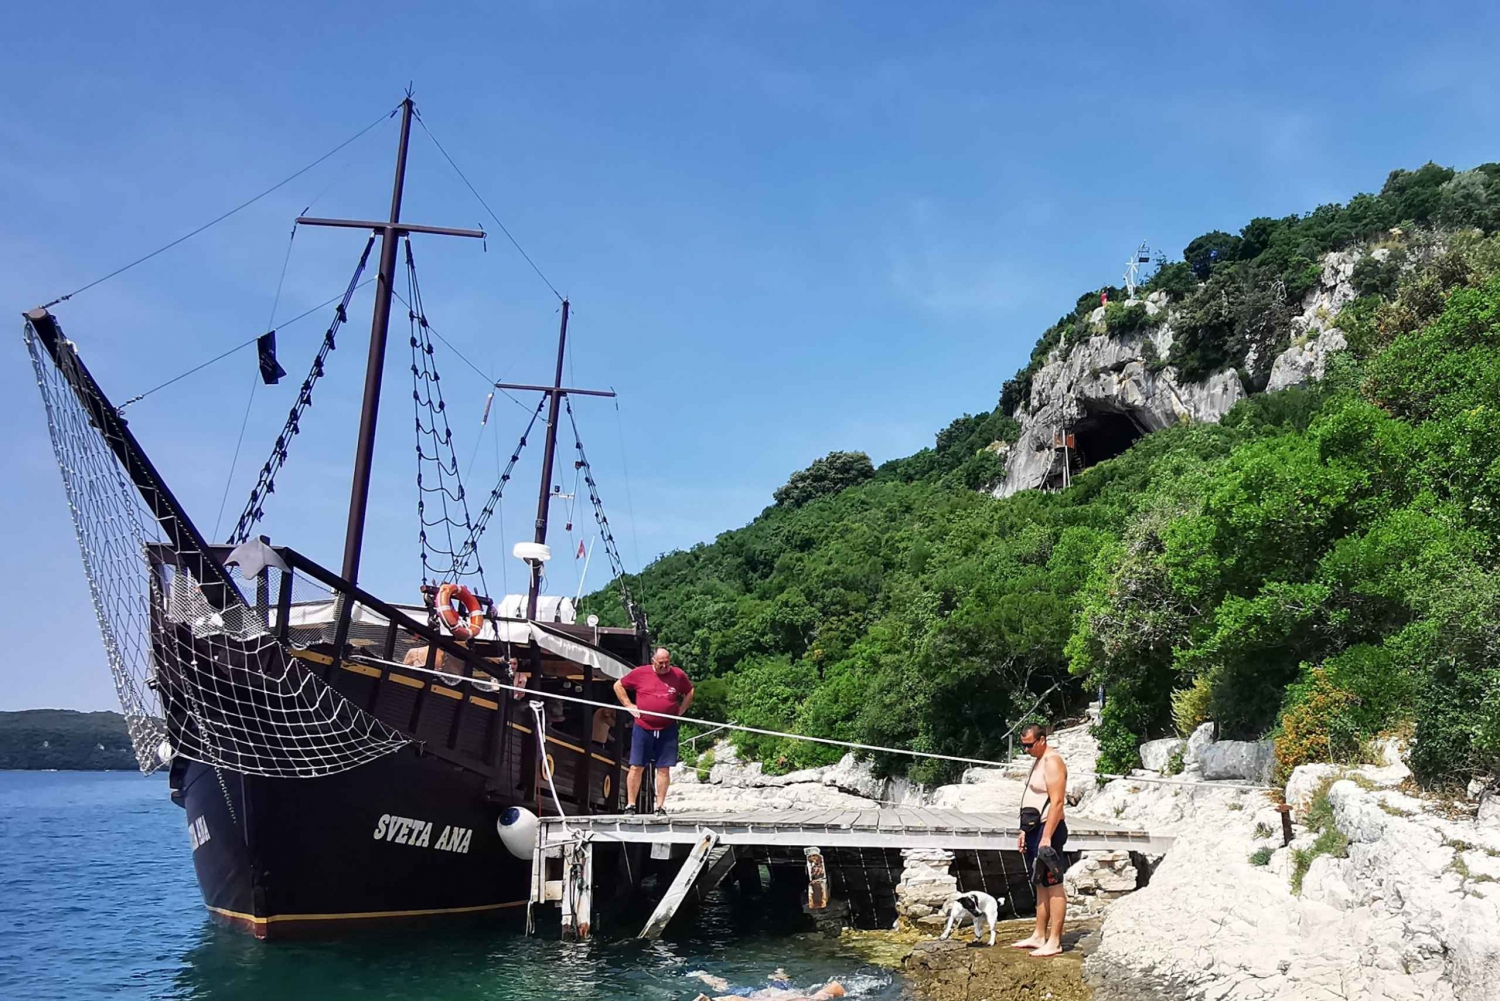 Vrsar: Lim Fjord Boat Tour with Swimming near Pirate's Cave